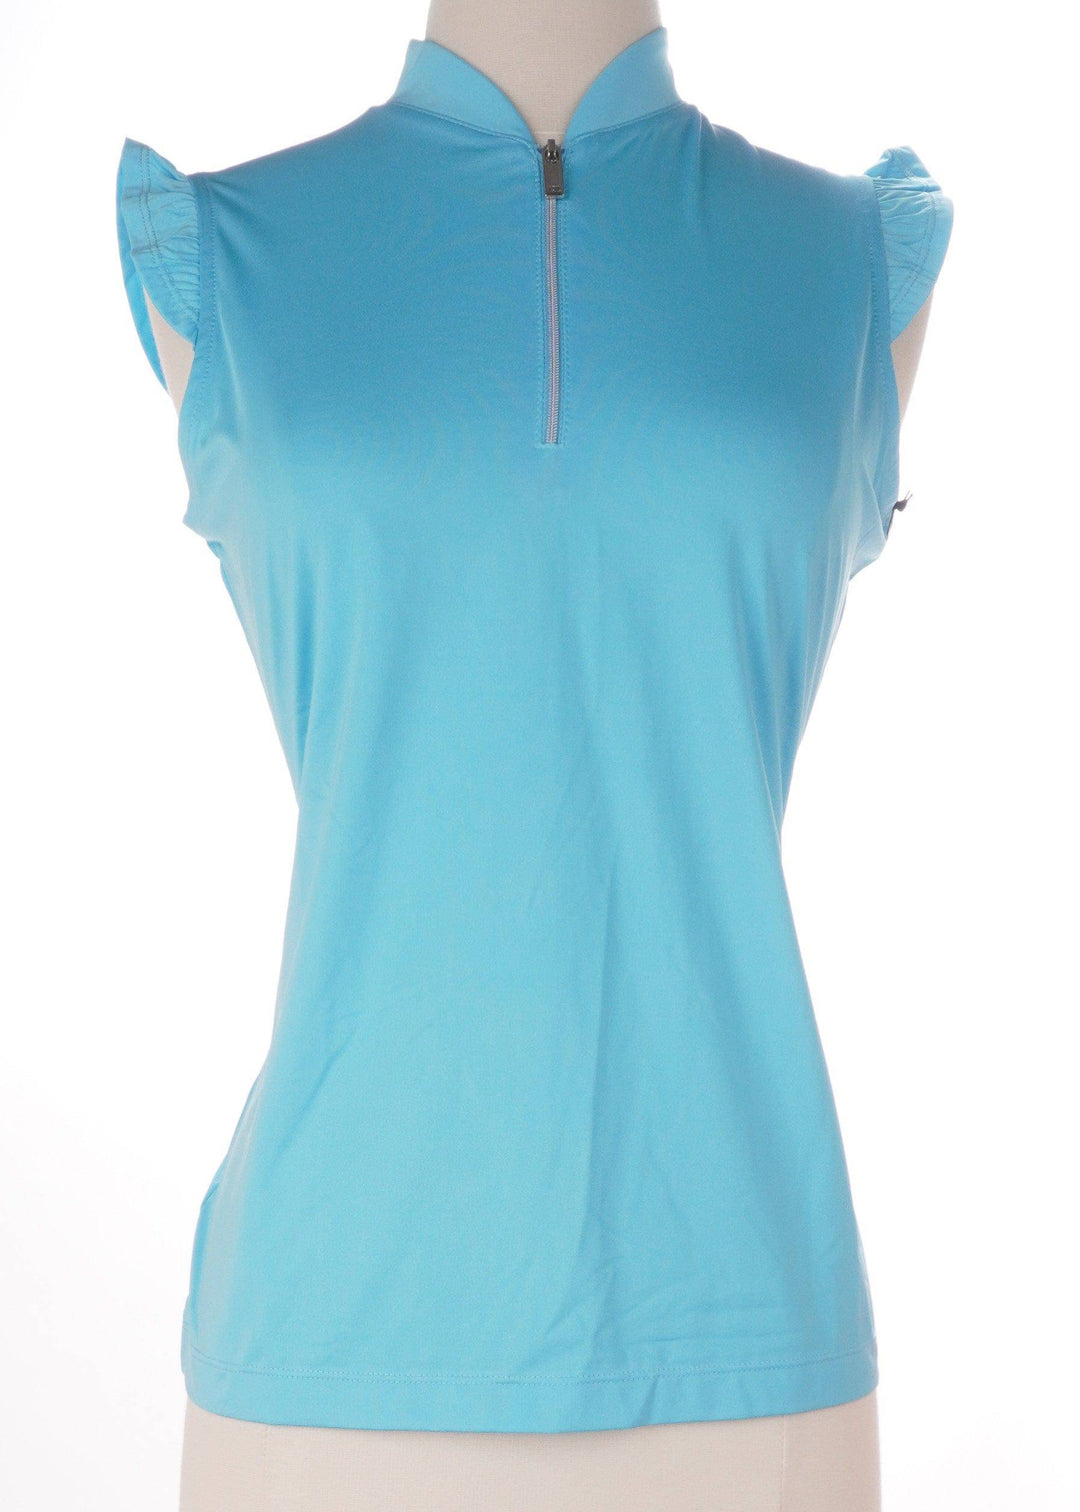 Tail Blue Fish / Small Tail Audreyann Sleeveless Top - Size Small